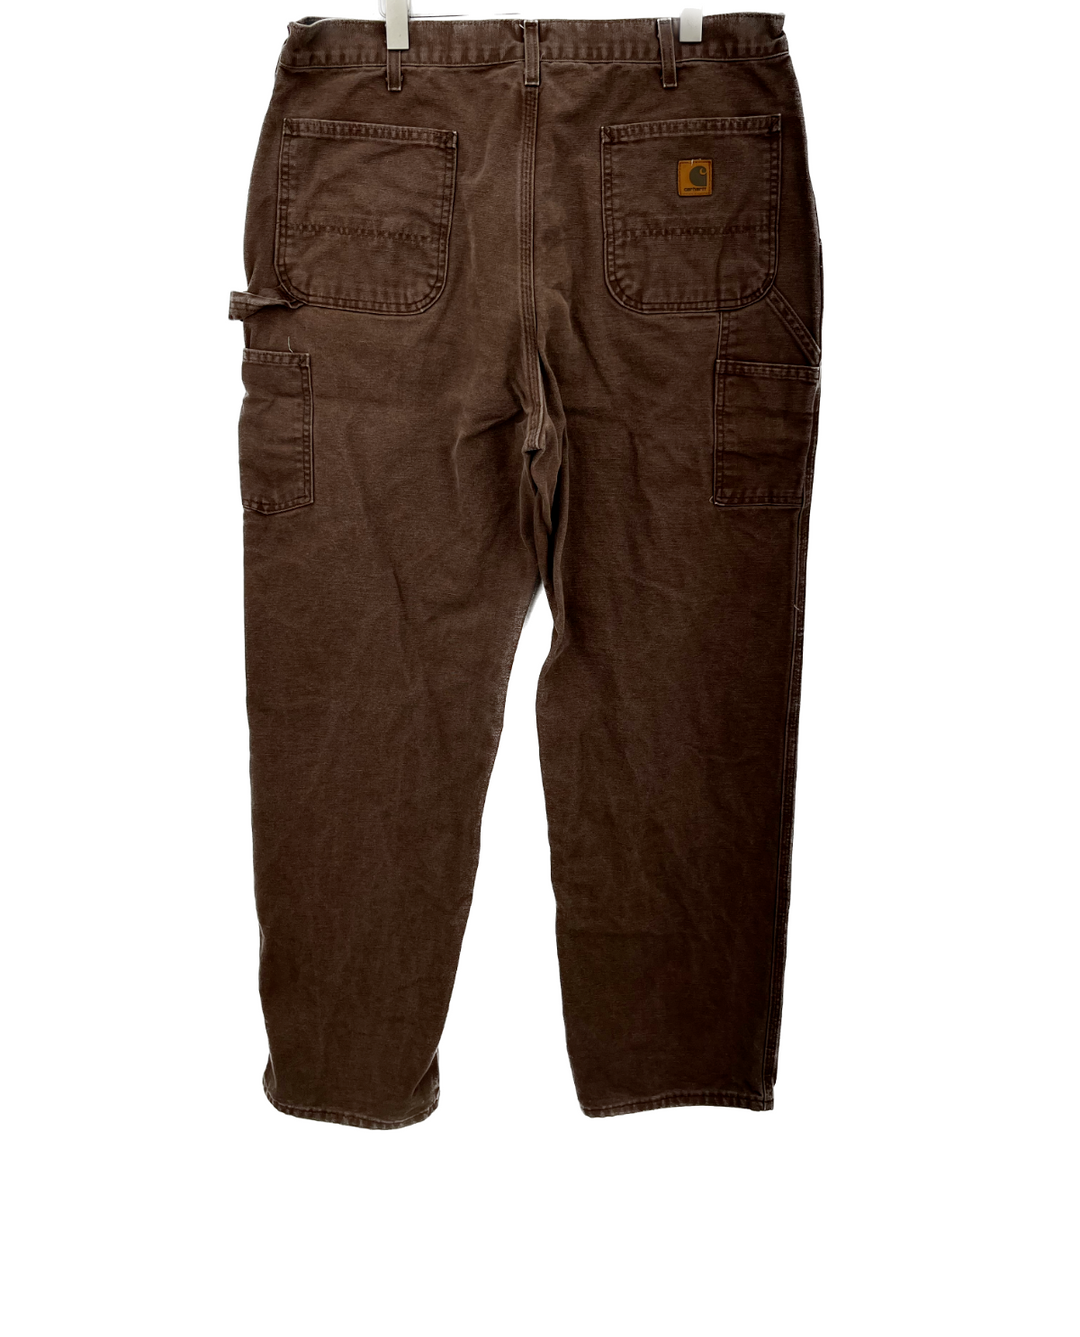 Vintage Carhartt Brown Dungaree Fit Canvas Pant Size 38 x 34